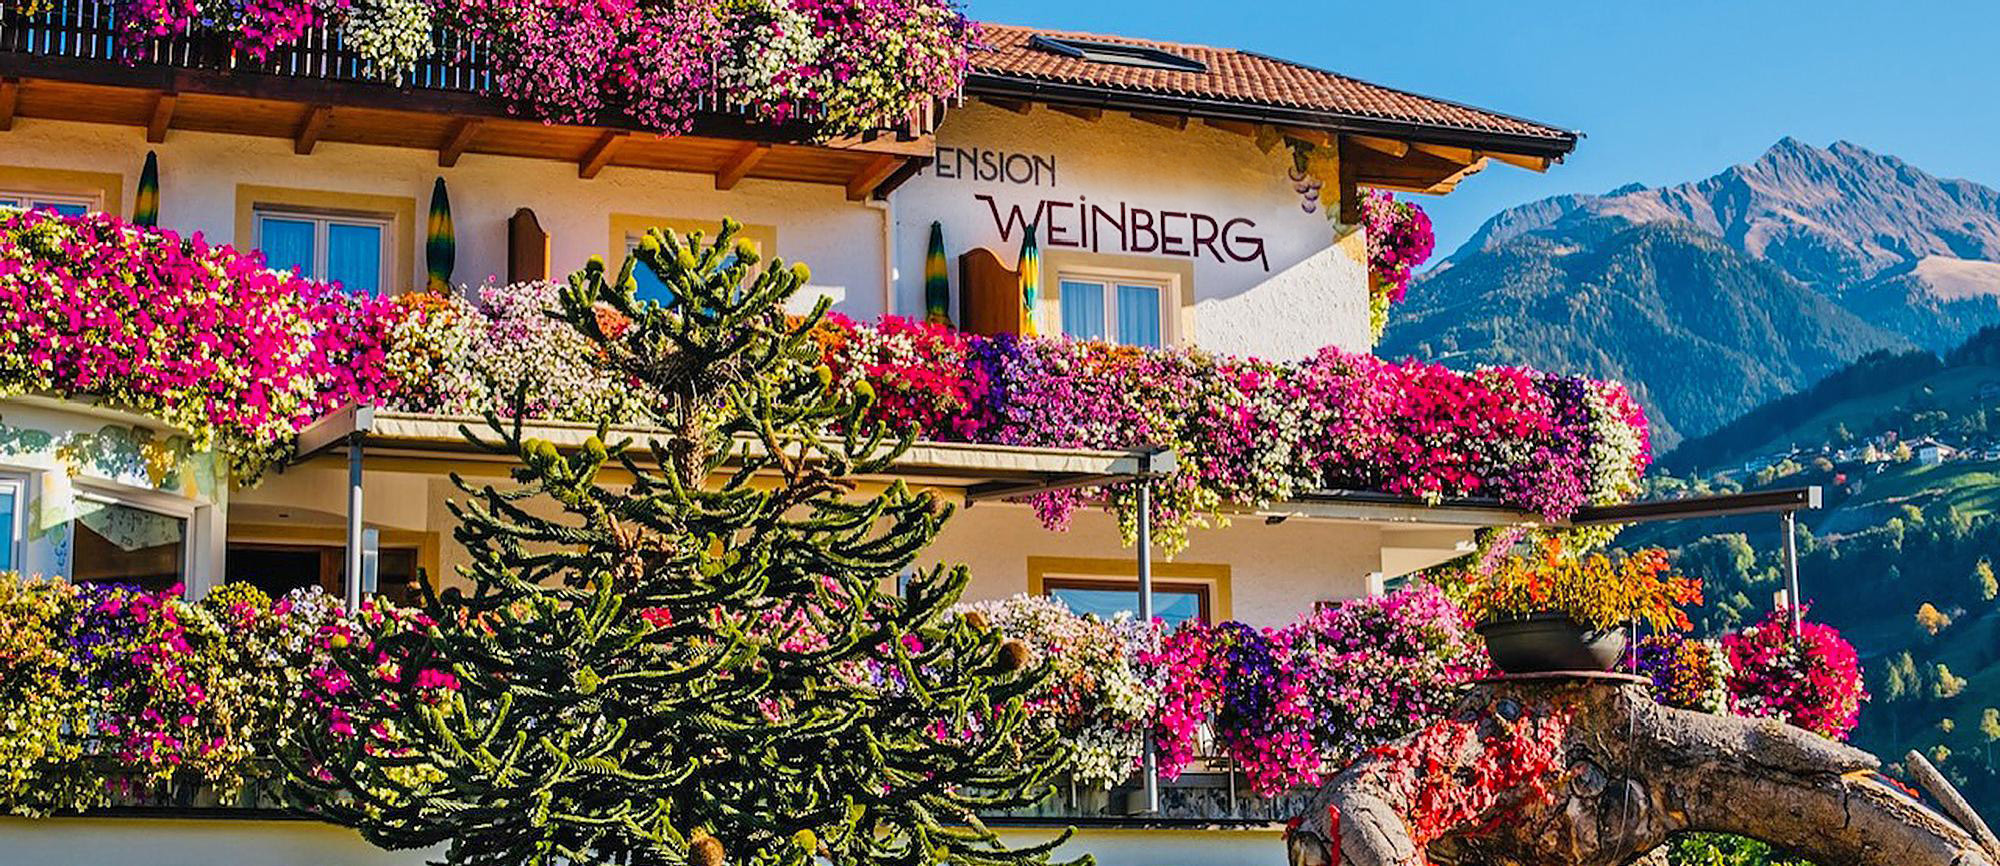 Pension Weinberg in Riffian